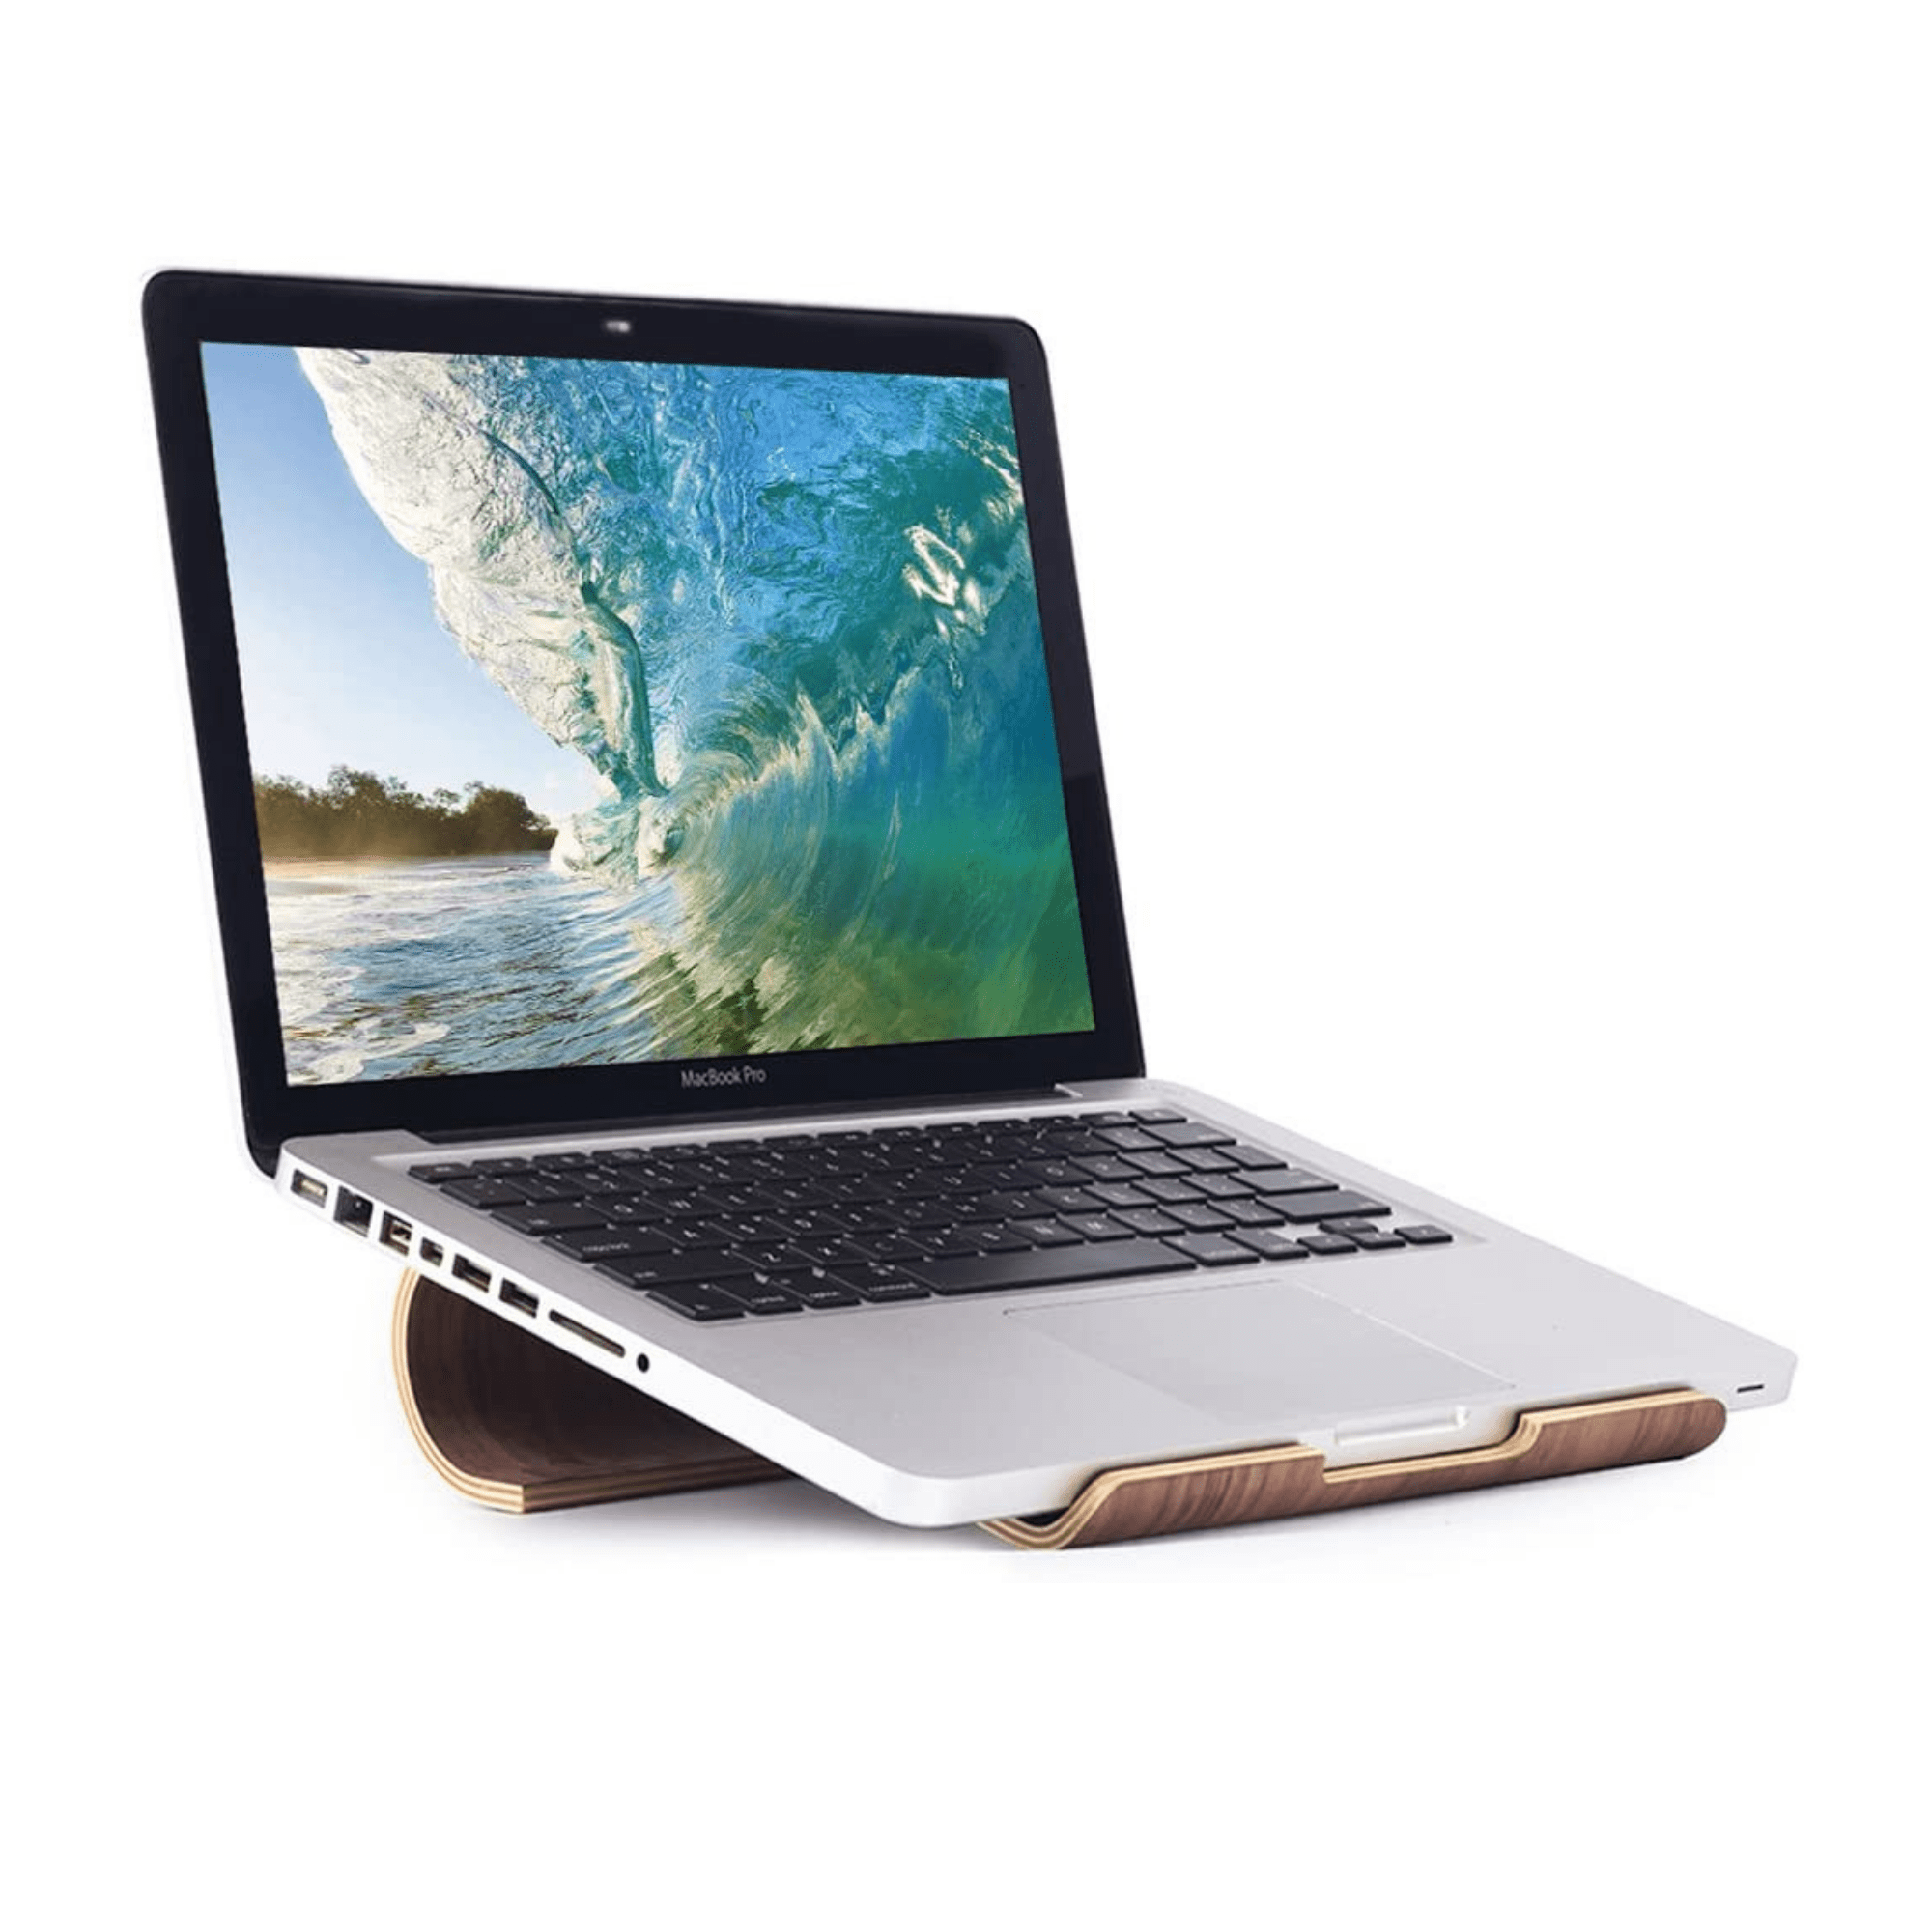 Wooden stand holder for Laptop 🌳 Natural Wood. ♻️ Eco-friendly. ✈️ Free Worldwide Shipping. 🎁 Perfect Gift.